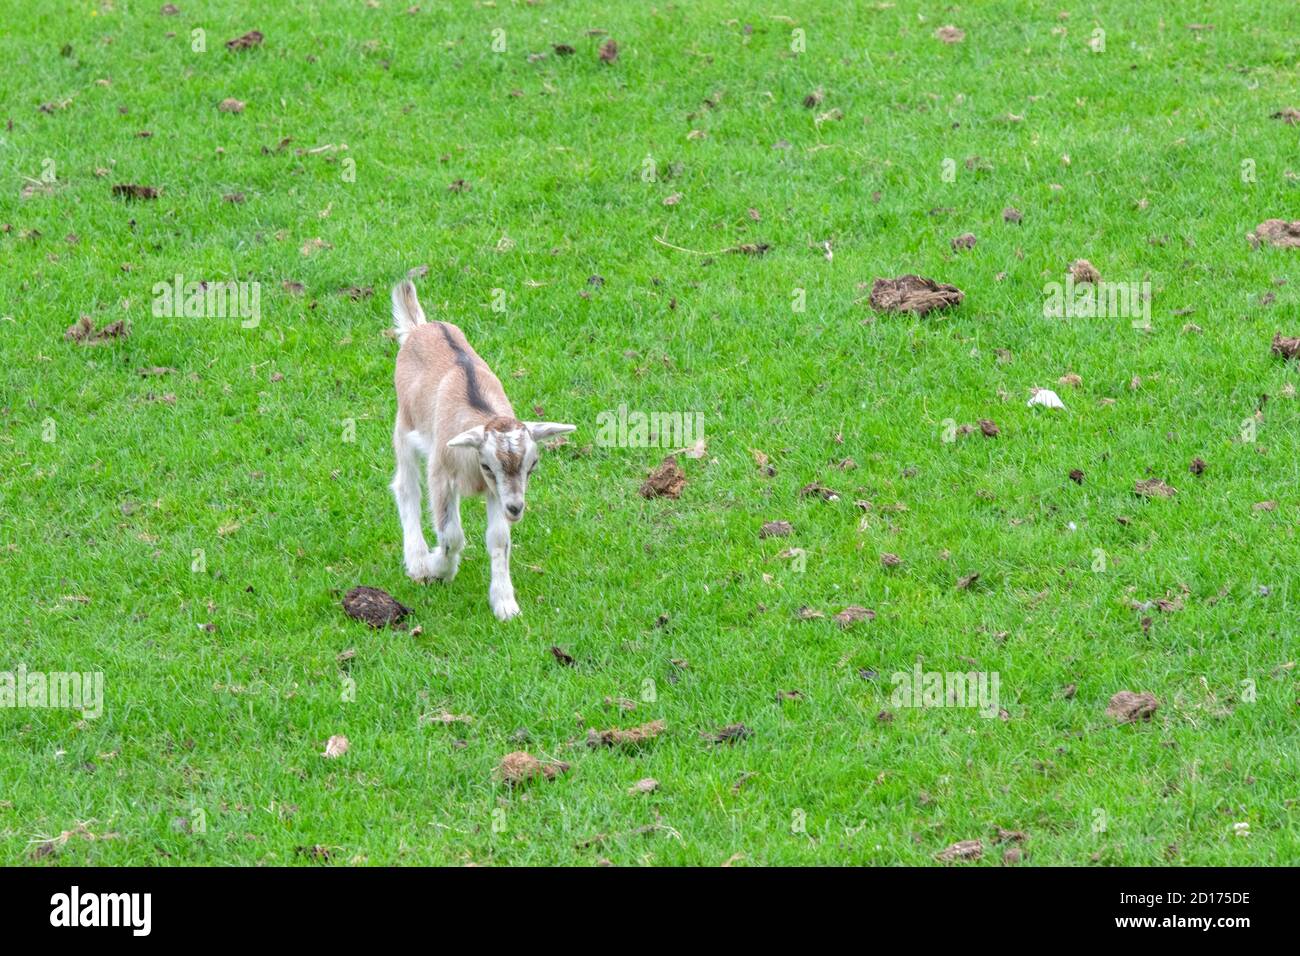 Close Up Of A Young Goat Running On The Grass Stock Photo